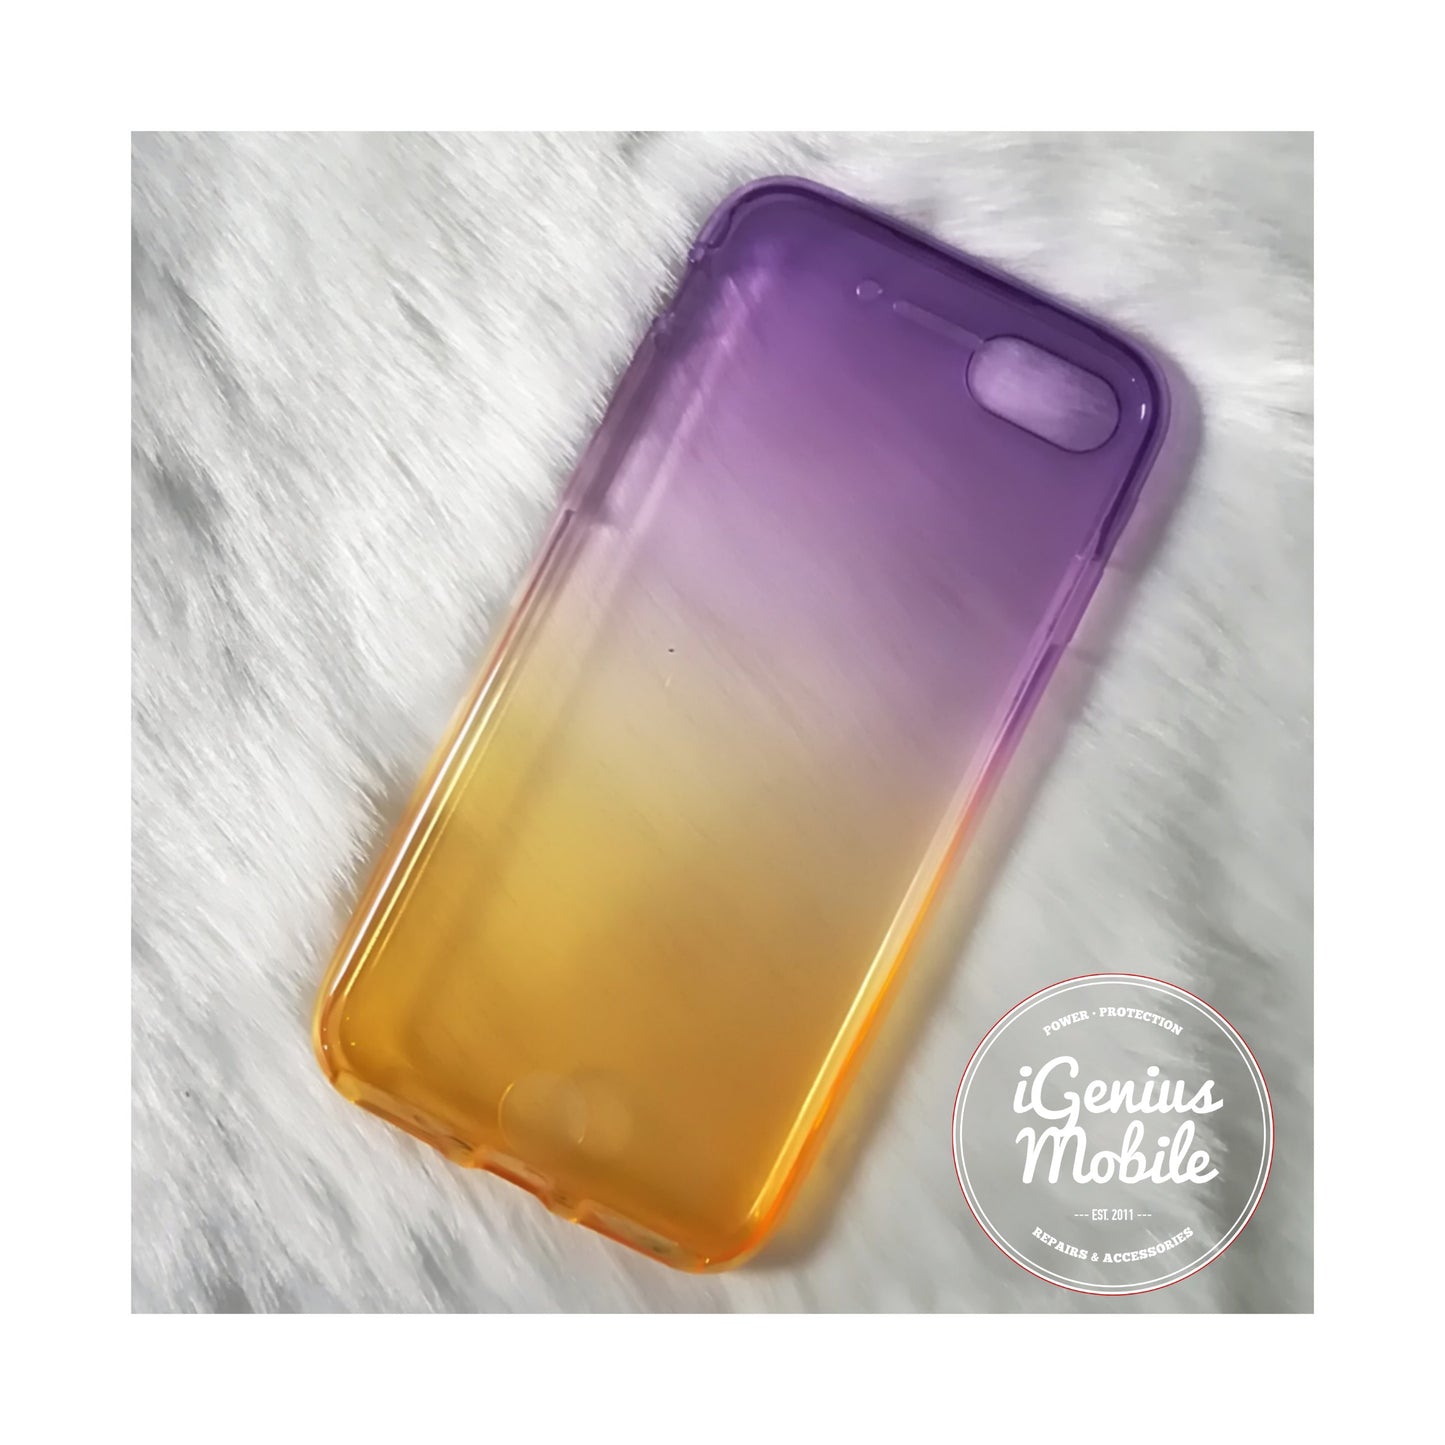 SALE - Shockproof Ombré Case (Silicone, Purple & Yellow)